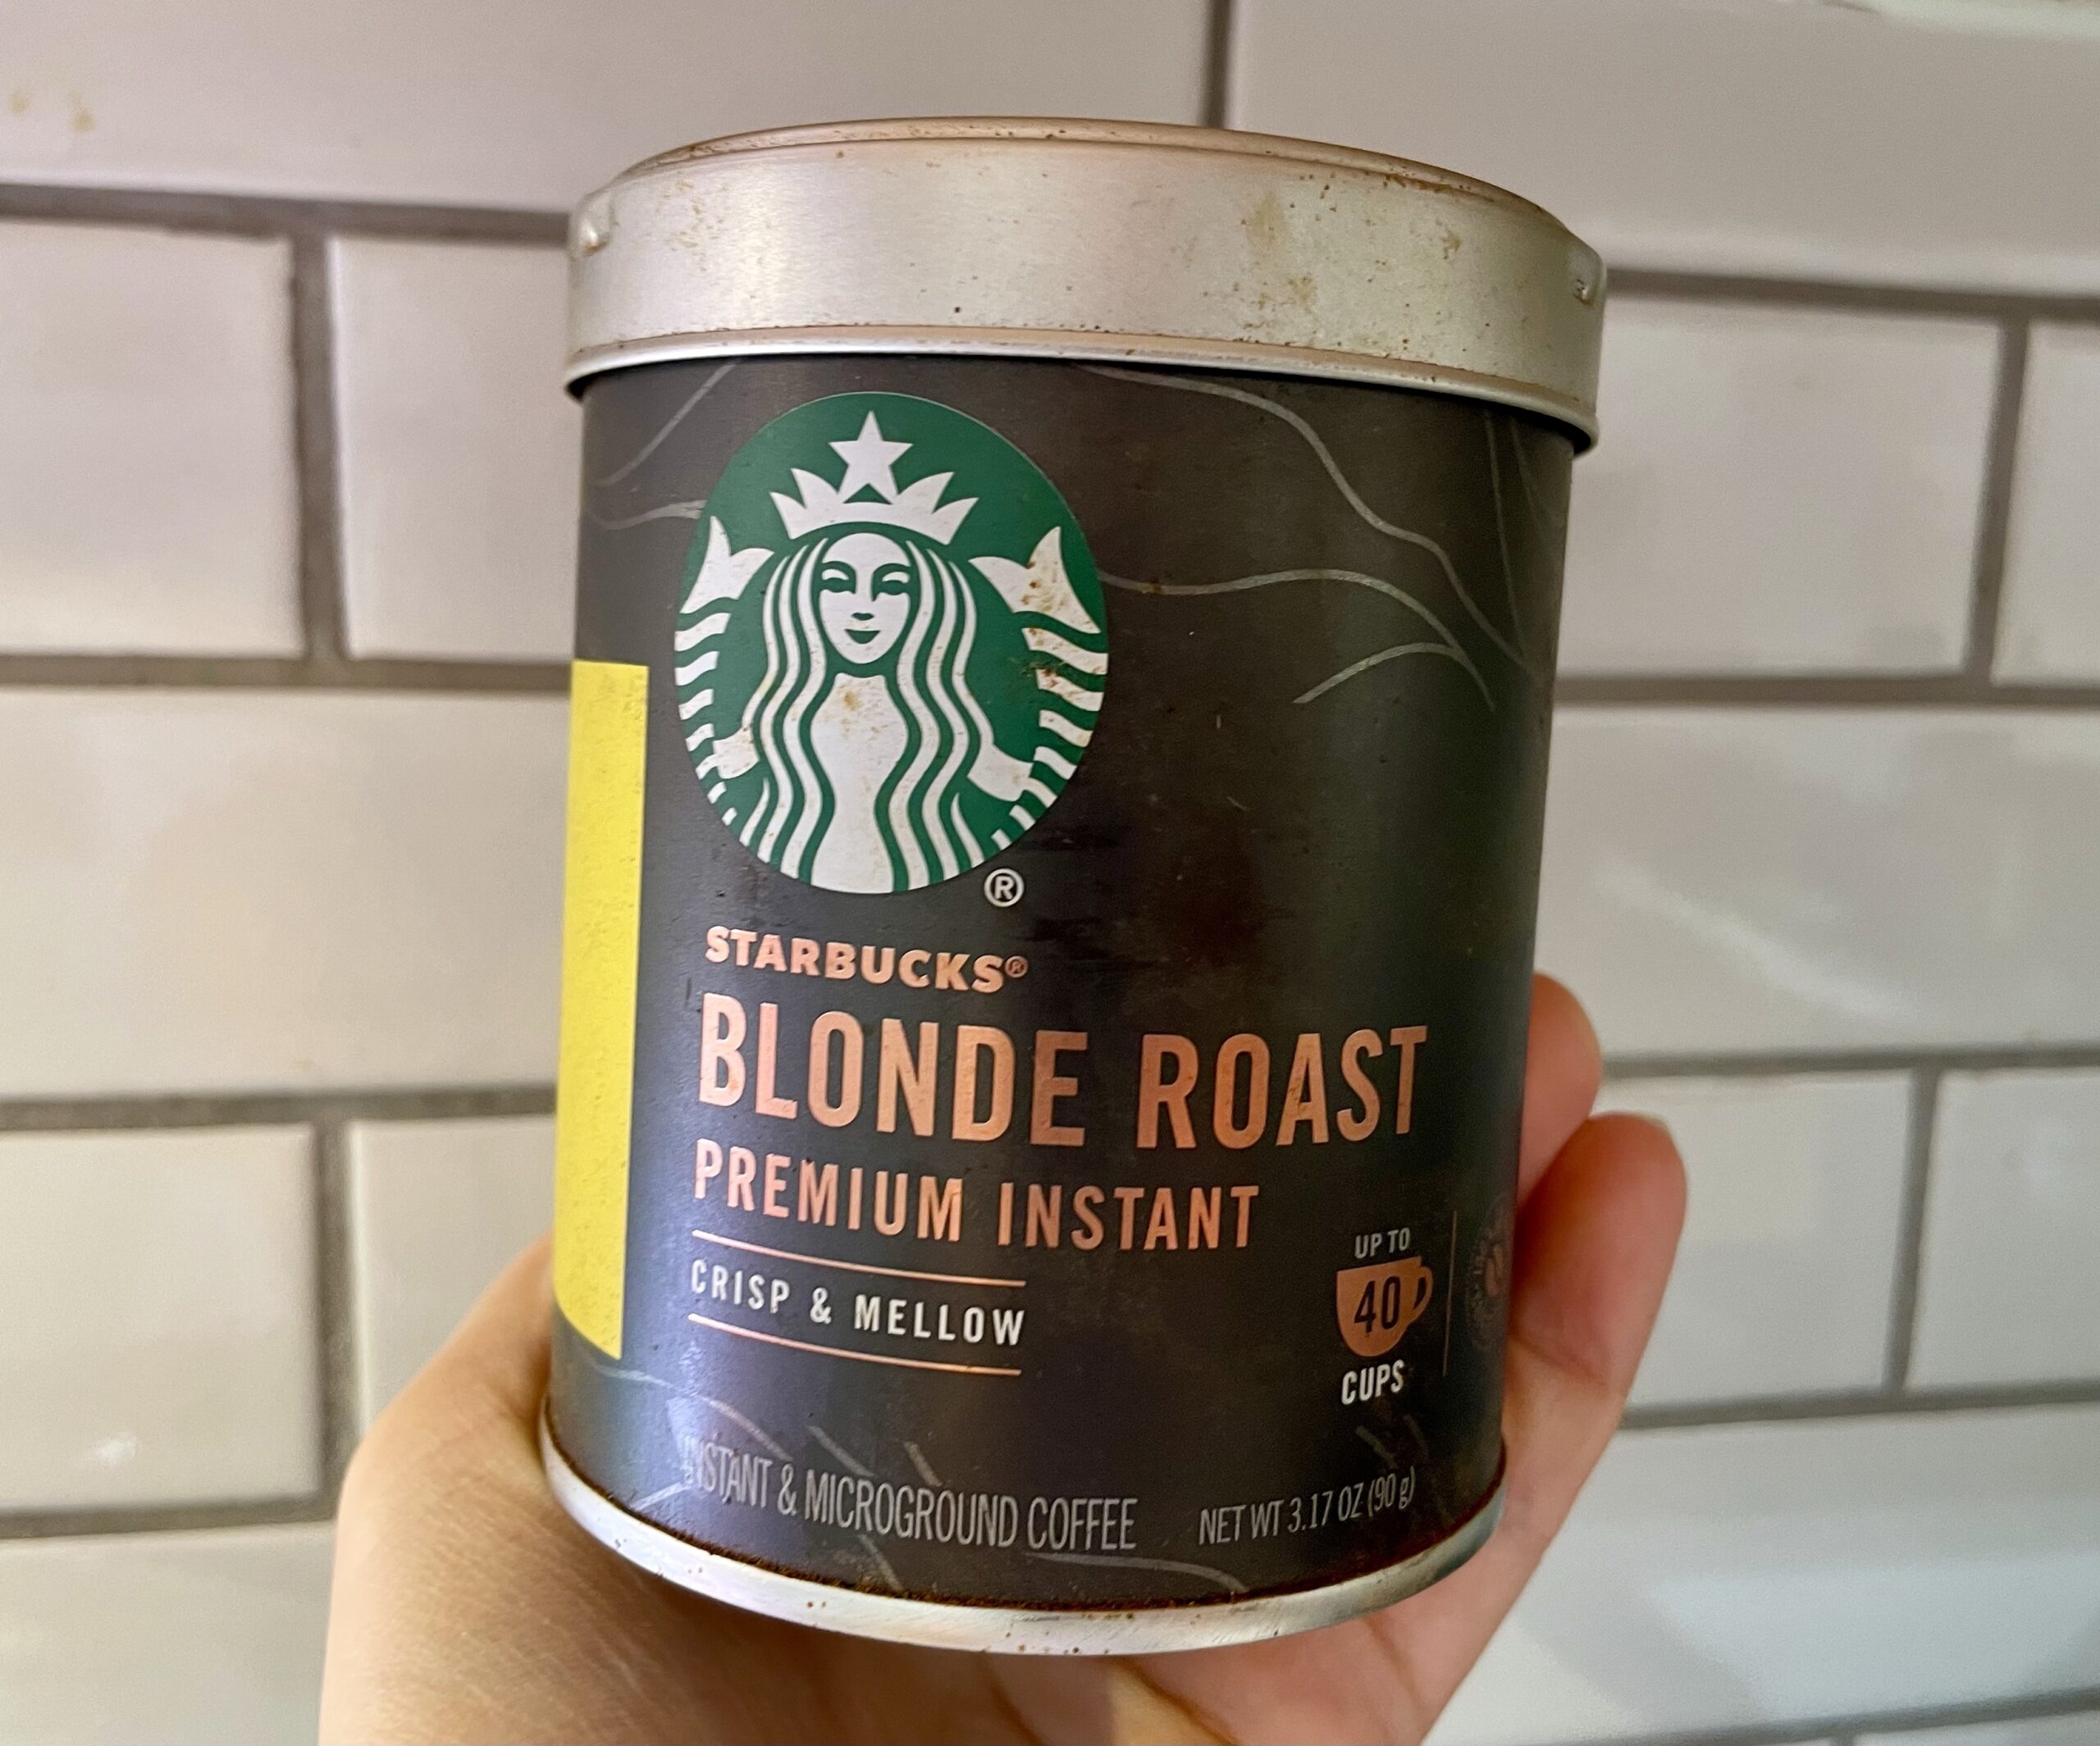 Hand holding a can of Starbucks Blonde Roast Instant Coffee against a white tile background